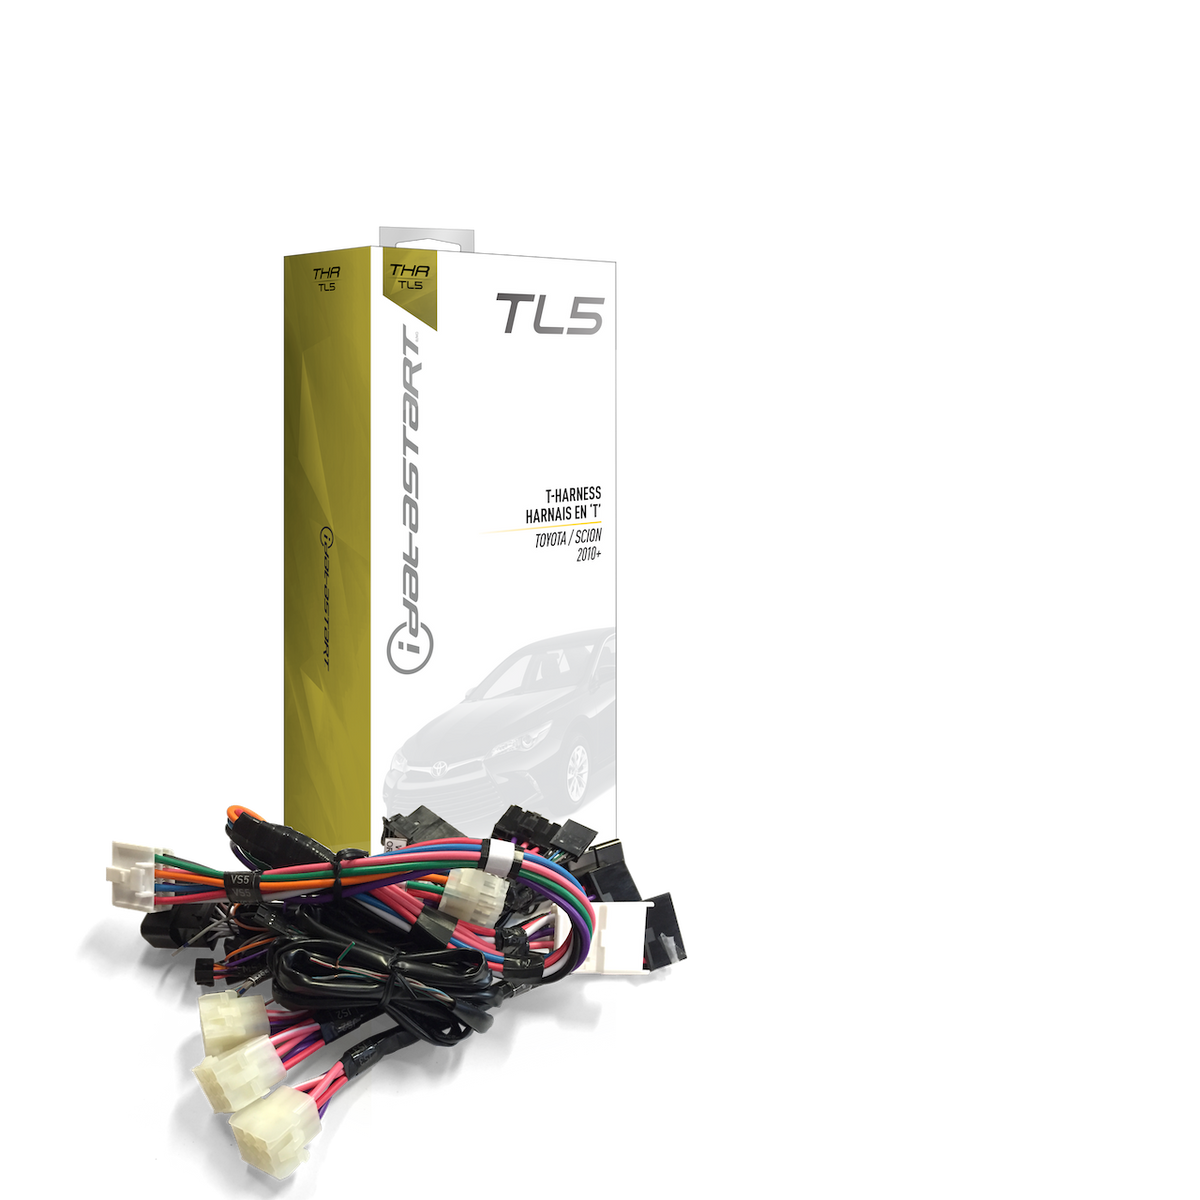 TL5 installation T-harness for iDataStart HC and other compatible products